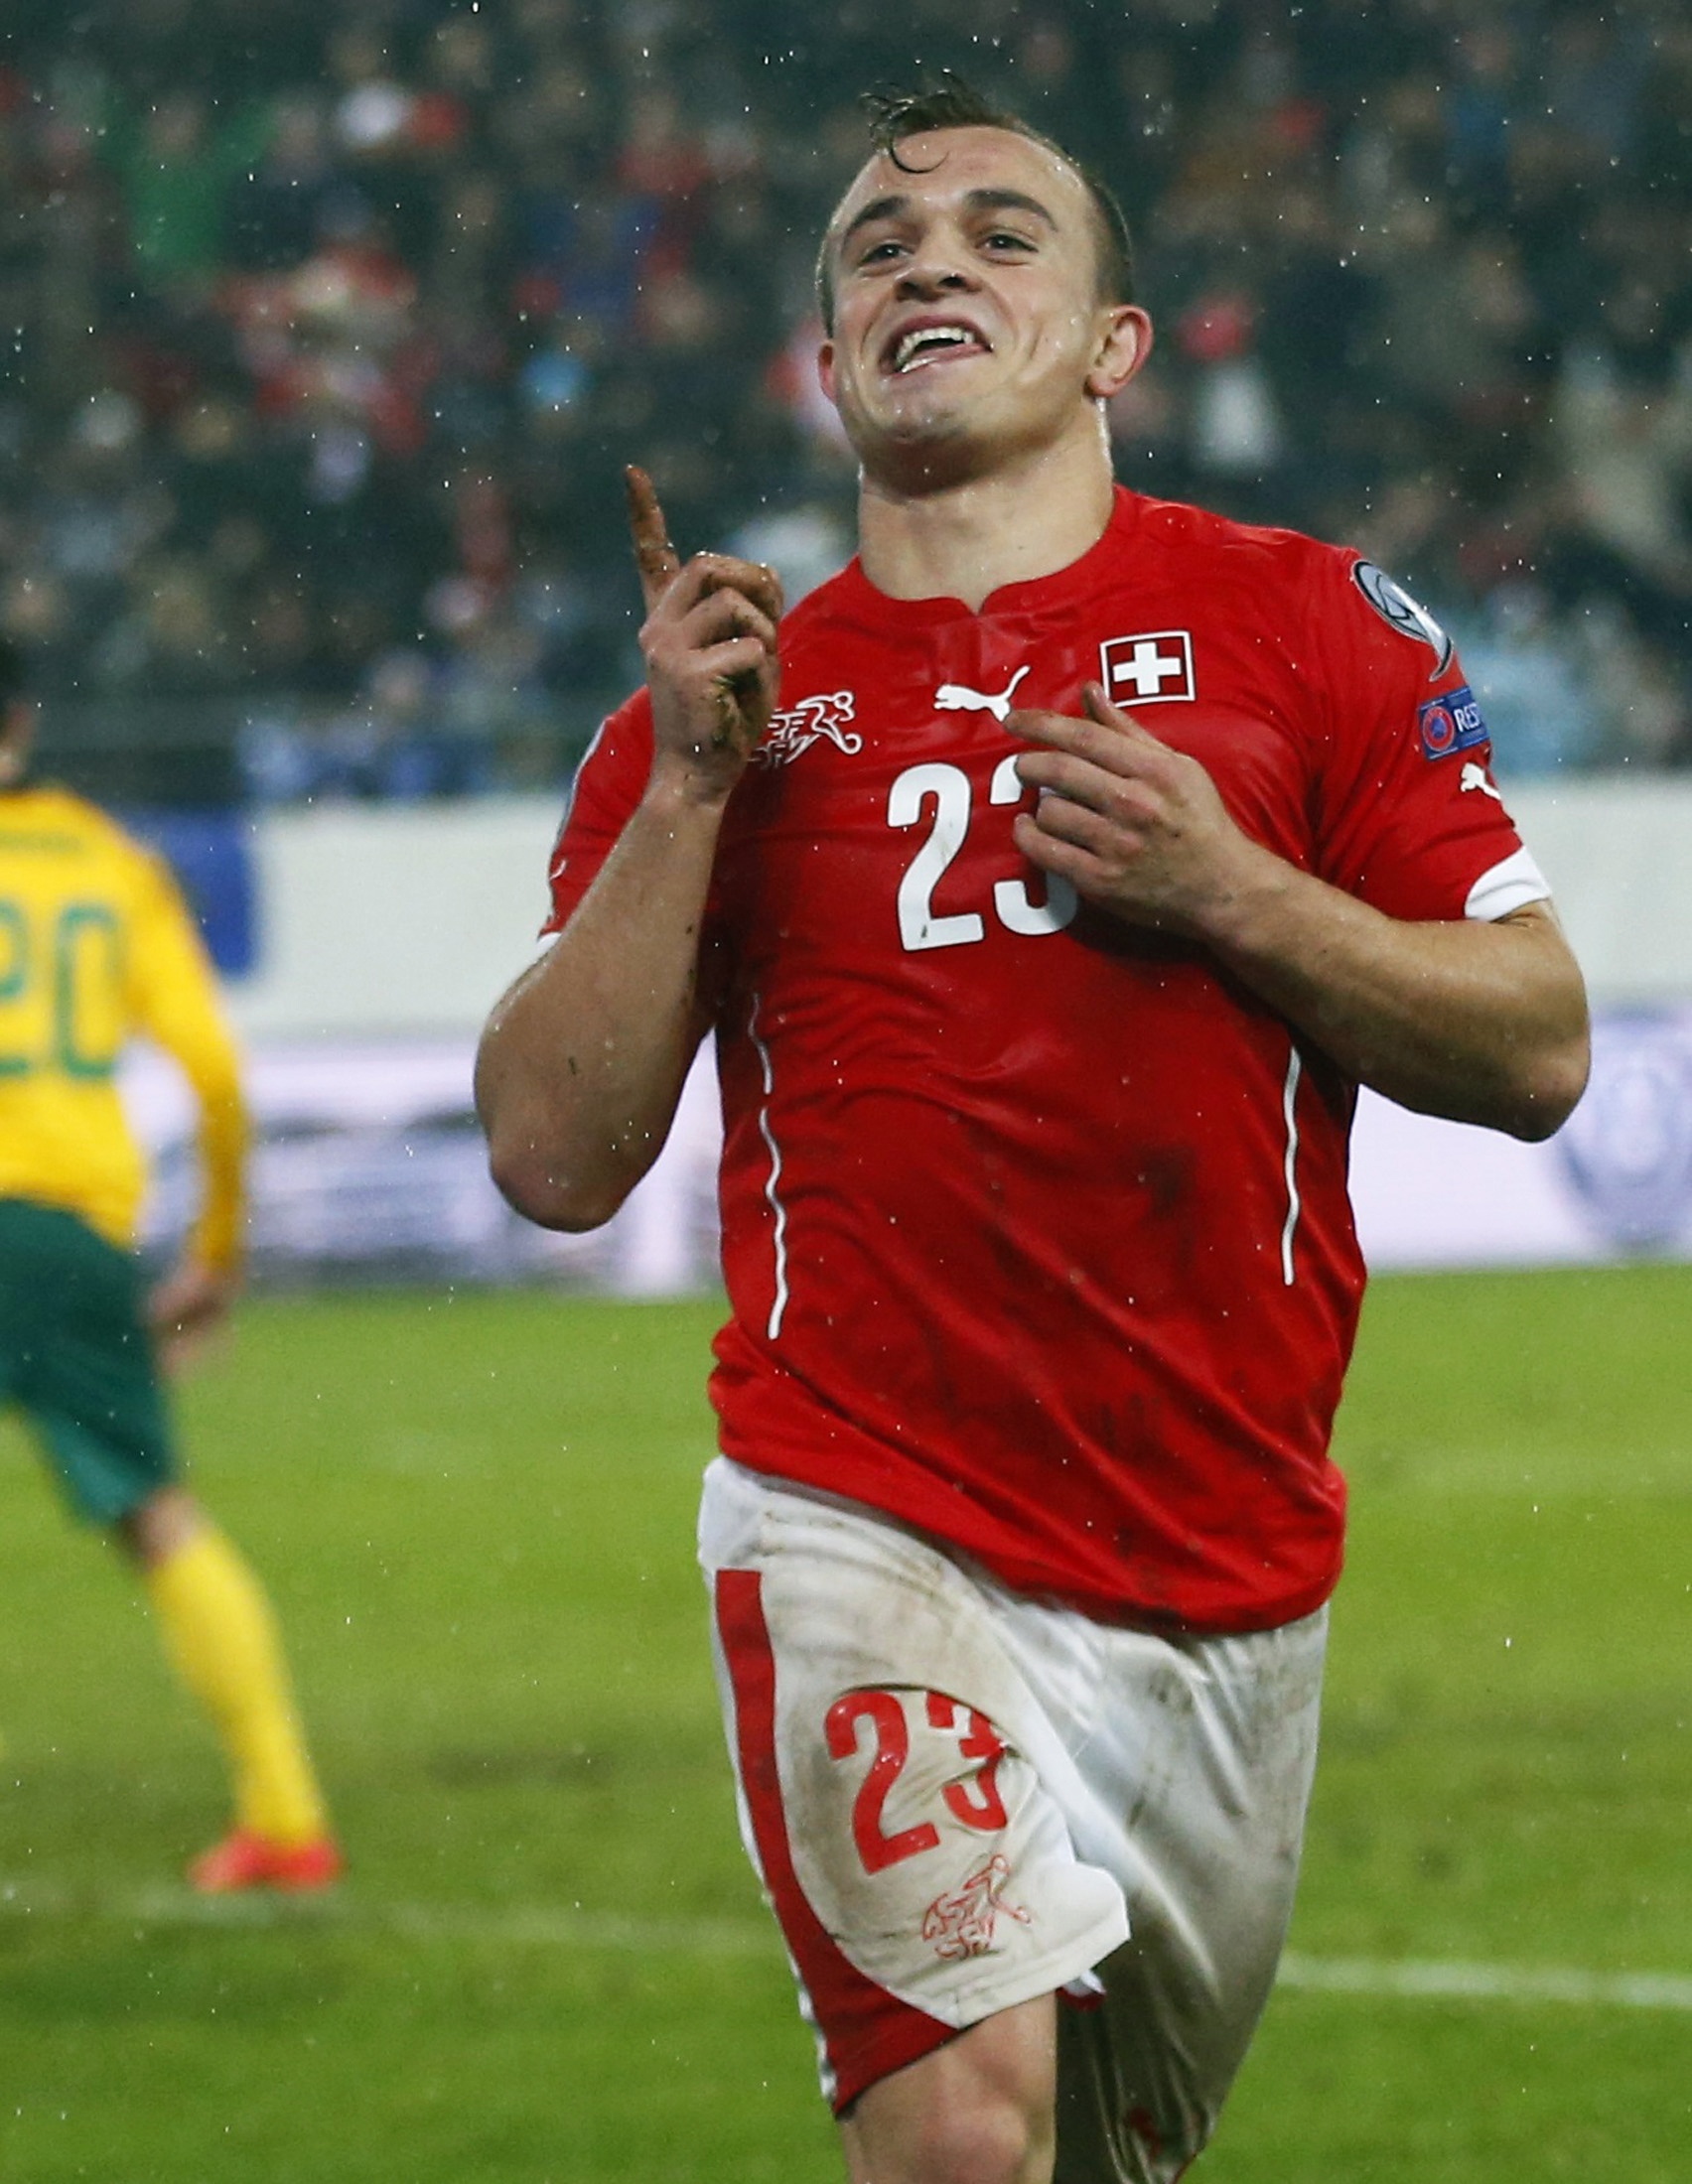 Switzerland's Xherdan Shaqiri celebrates after scoring a goal during their Euro 2016 Group E qualifying soccer match against Lithuania at AFG Arena in St. Gallen